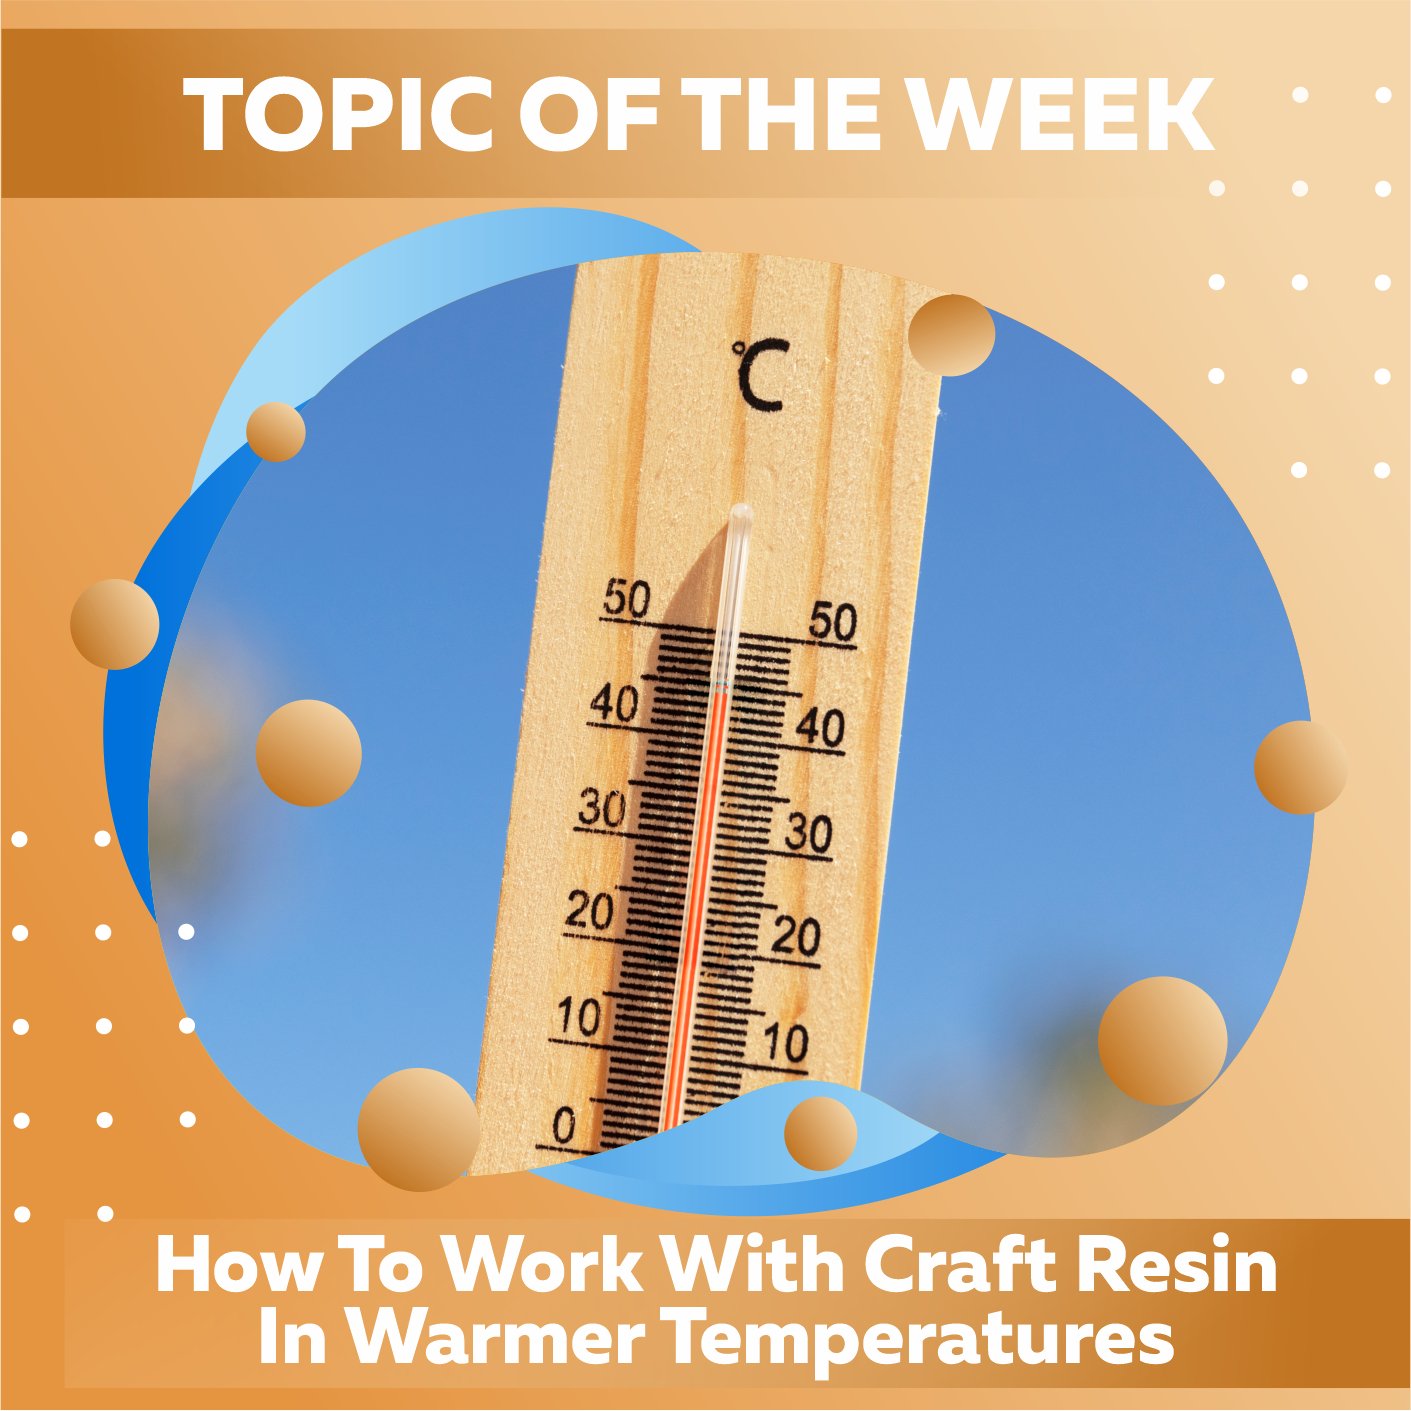 How To Work With Craft Resin In Warmer Temperatures - Craft Resin